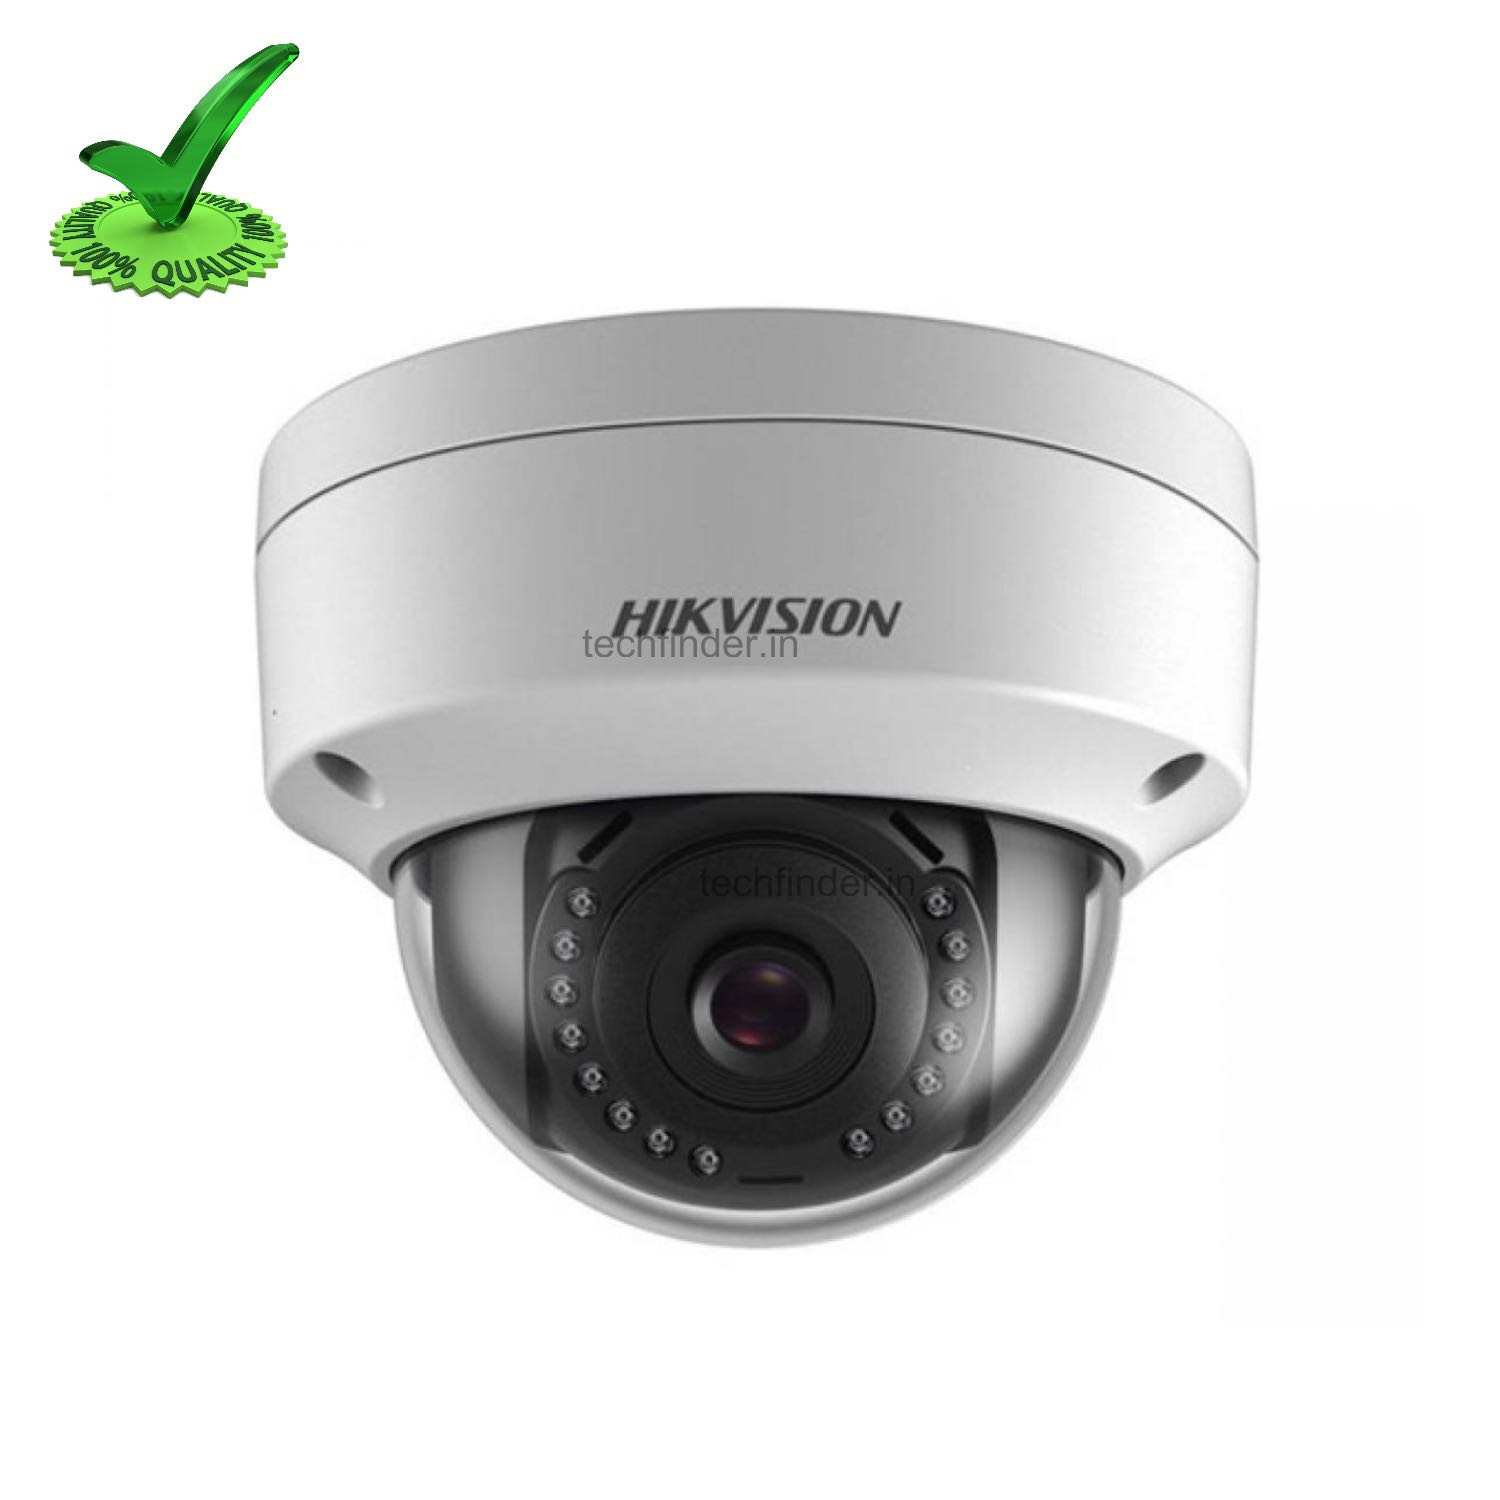 Hikvision DS-2CD2121G0-IW 2MP IP Network Dome Camera